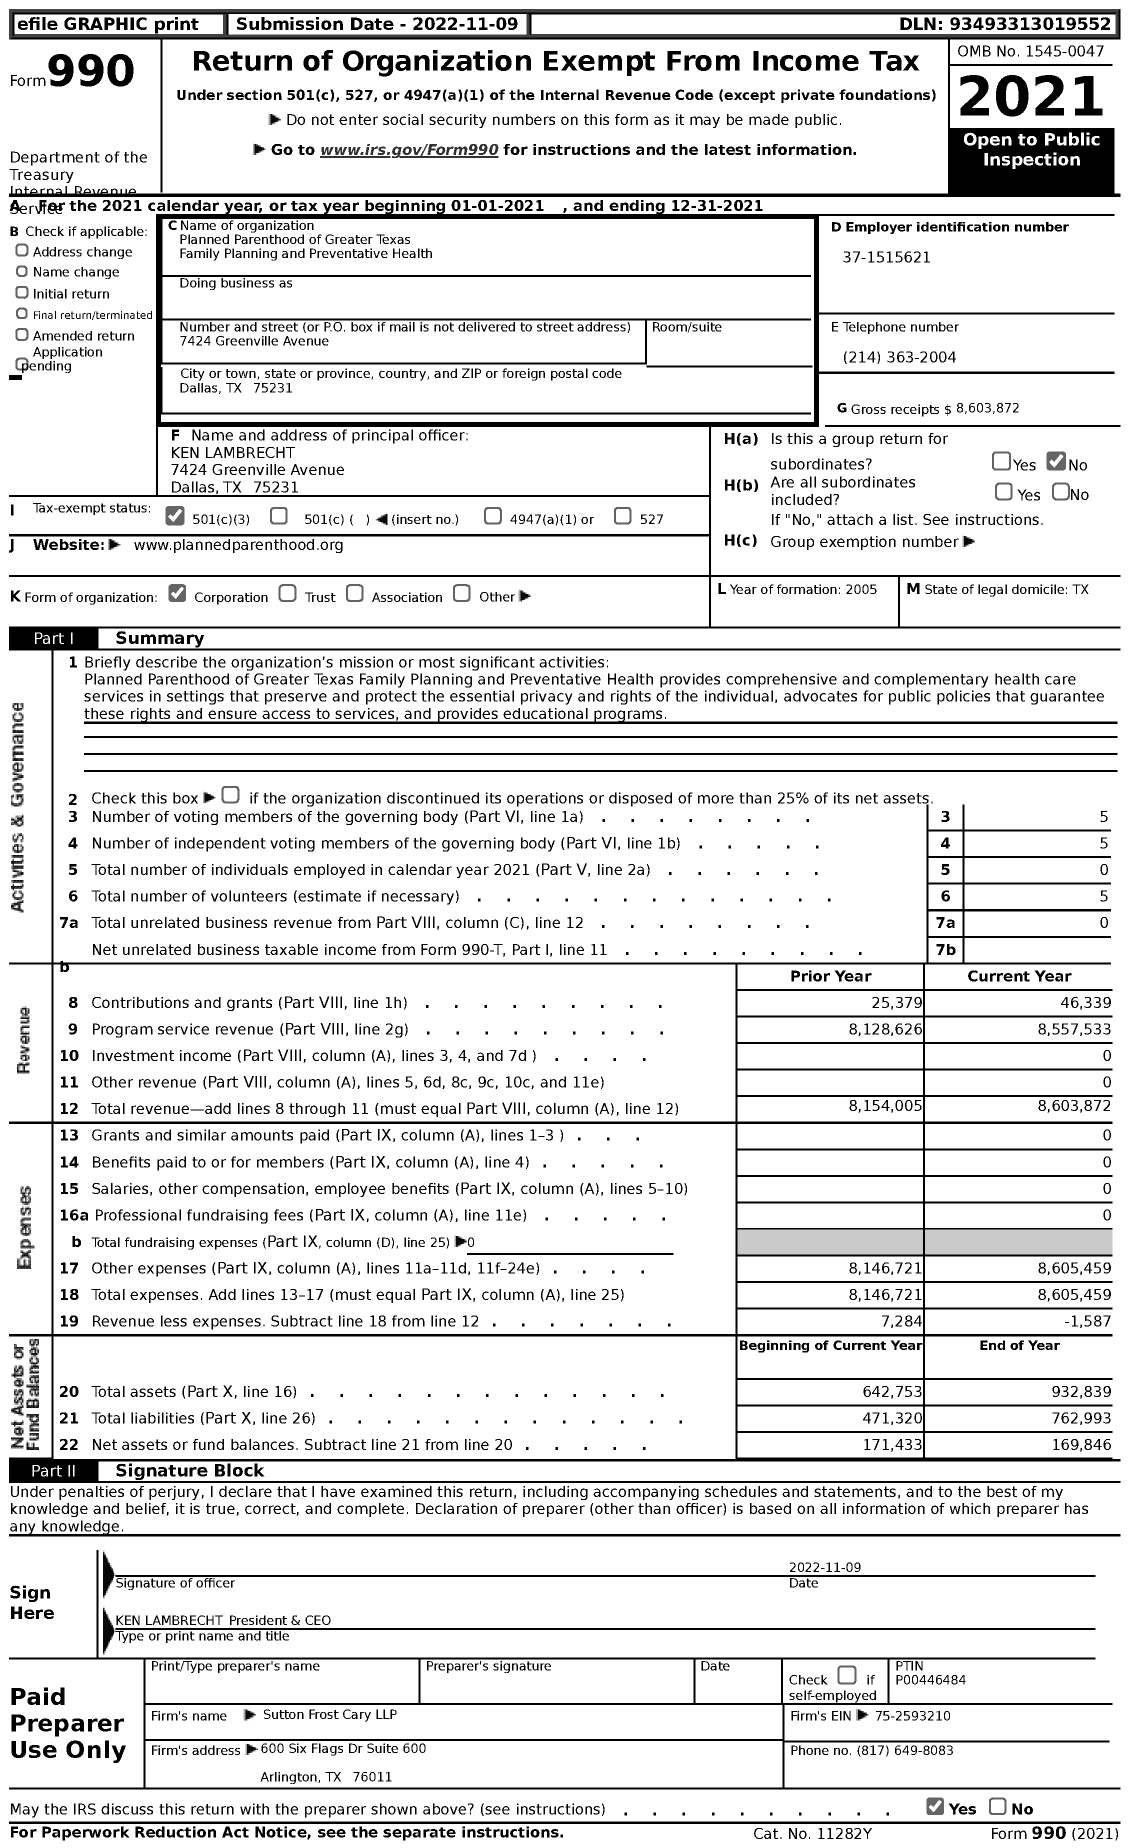 Image of first page of 2021 Form 990 for Planned Parenthood of Greater Texas Family Planning and Preventative Health